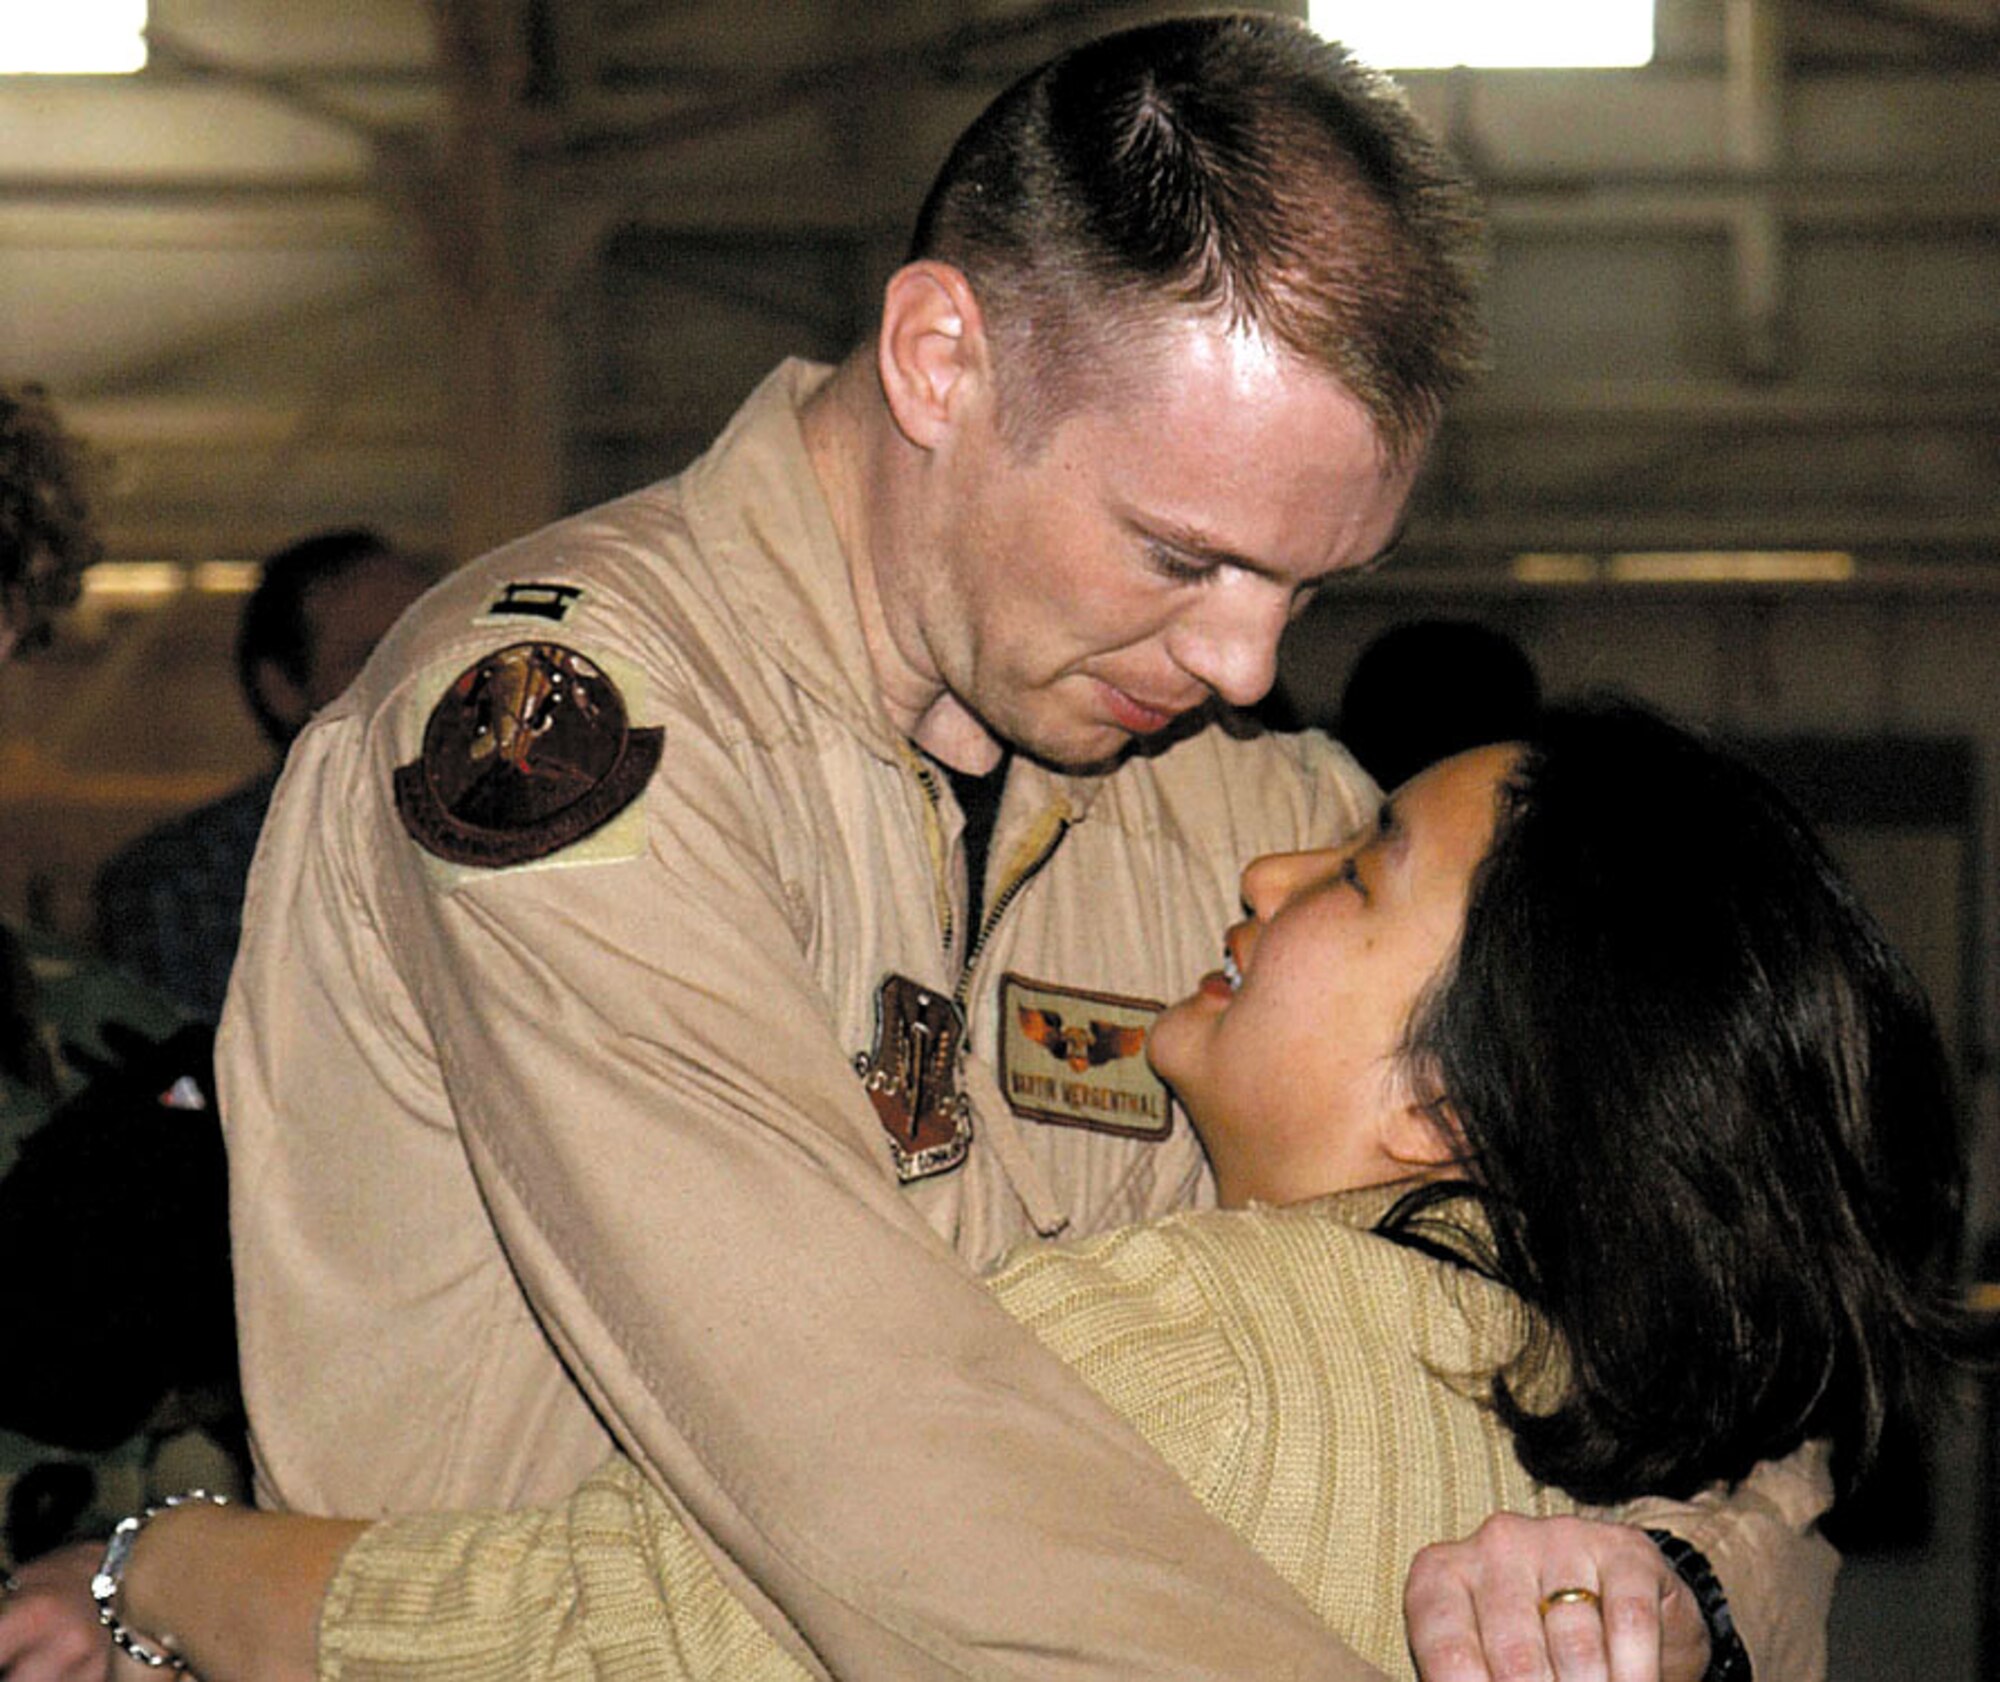 MINOT AIR FORCE BASE, N.D. -- Capt. Martin Mergenthal, a 23rd Bomb Squadron B-52 radar navigator, is welcomed home from serving in Operation Iraqi Freedom by his wife, Kimberly.  (U.S. Air Force photo by Airman Alicia M. Sarkkinen)